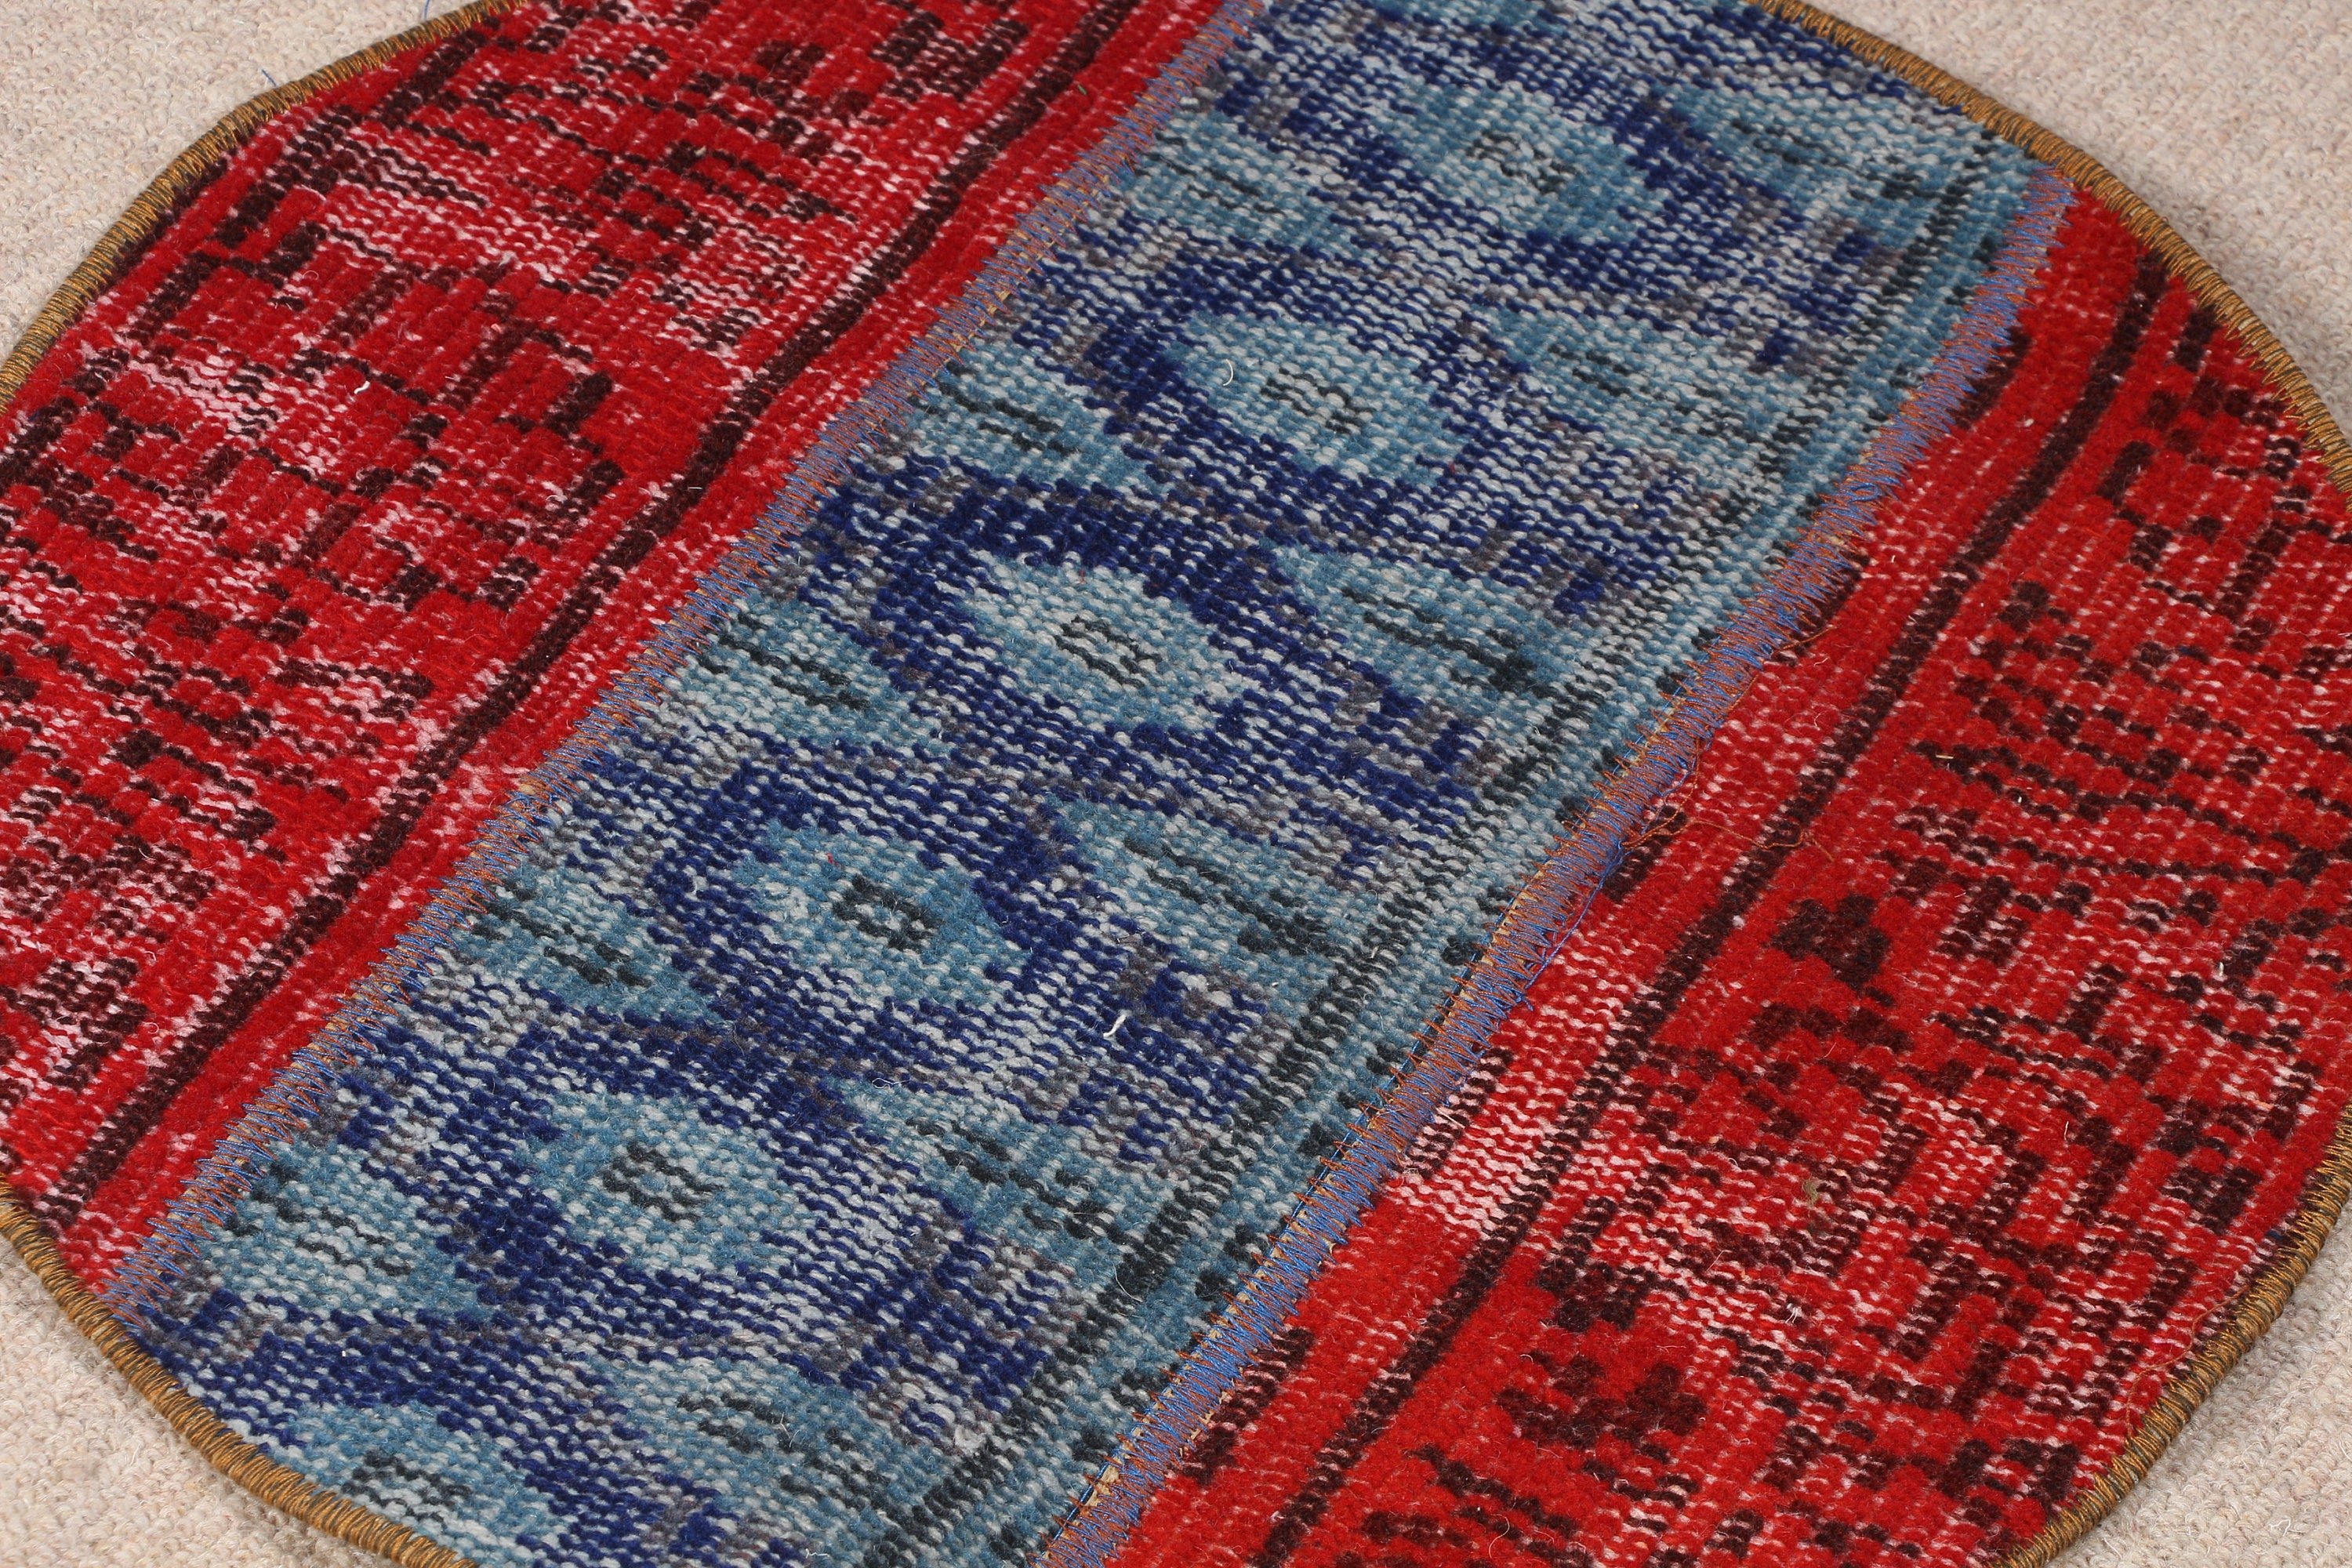 Old Rug, Rugs for Entry, Car Mat Rug, Kitchen Rugs, Red Cool Rug, Nursery Rugs, Turkish Rug, Vintage Rug, Oushak Rugs, 1.7x1.7 ft Small Rug